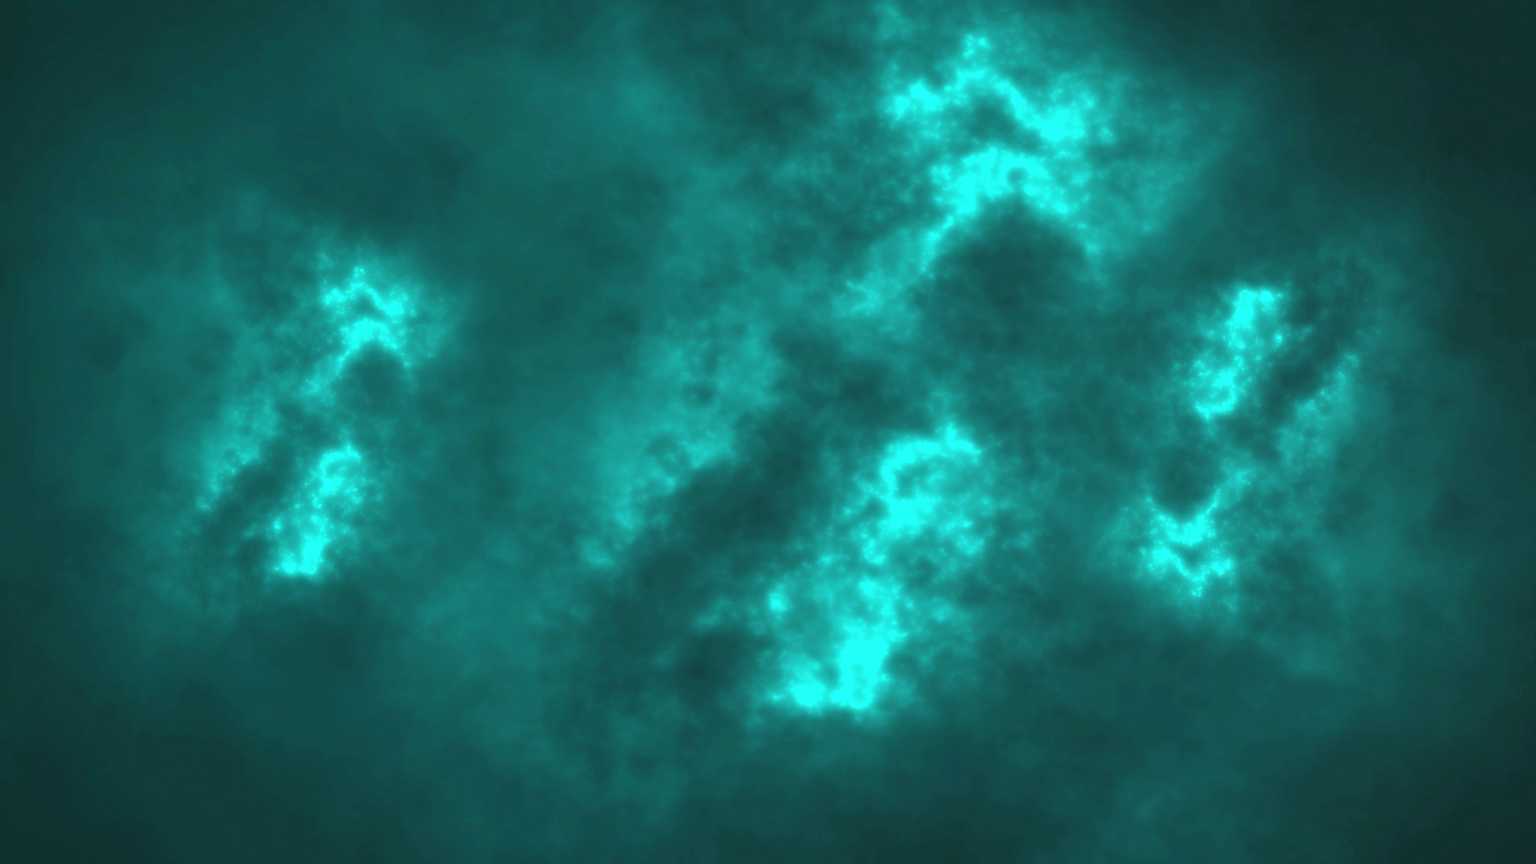 4K Glowing Teal Motion Background Looped || VFX Free To Use Screensaver || Free Download